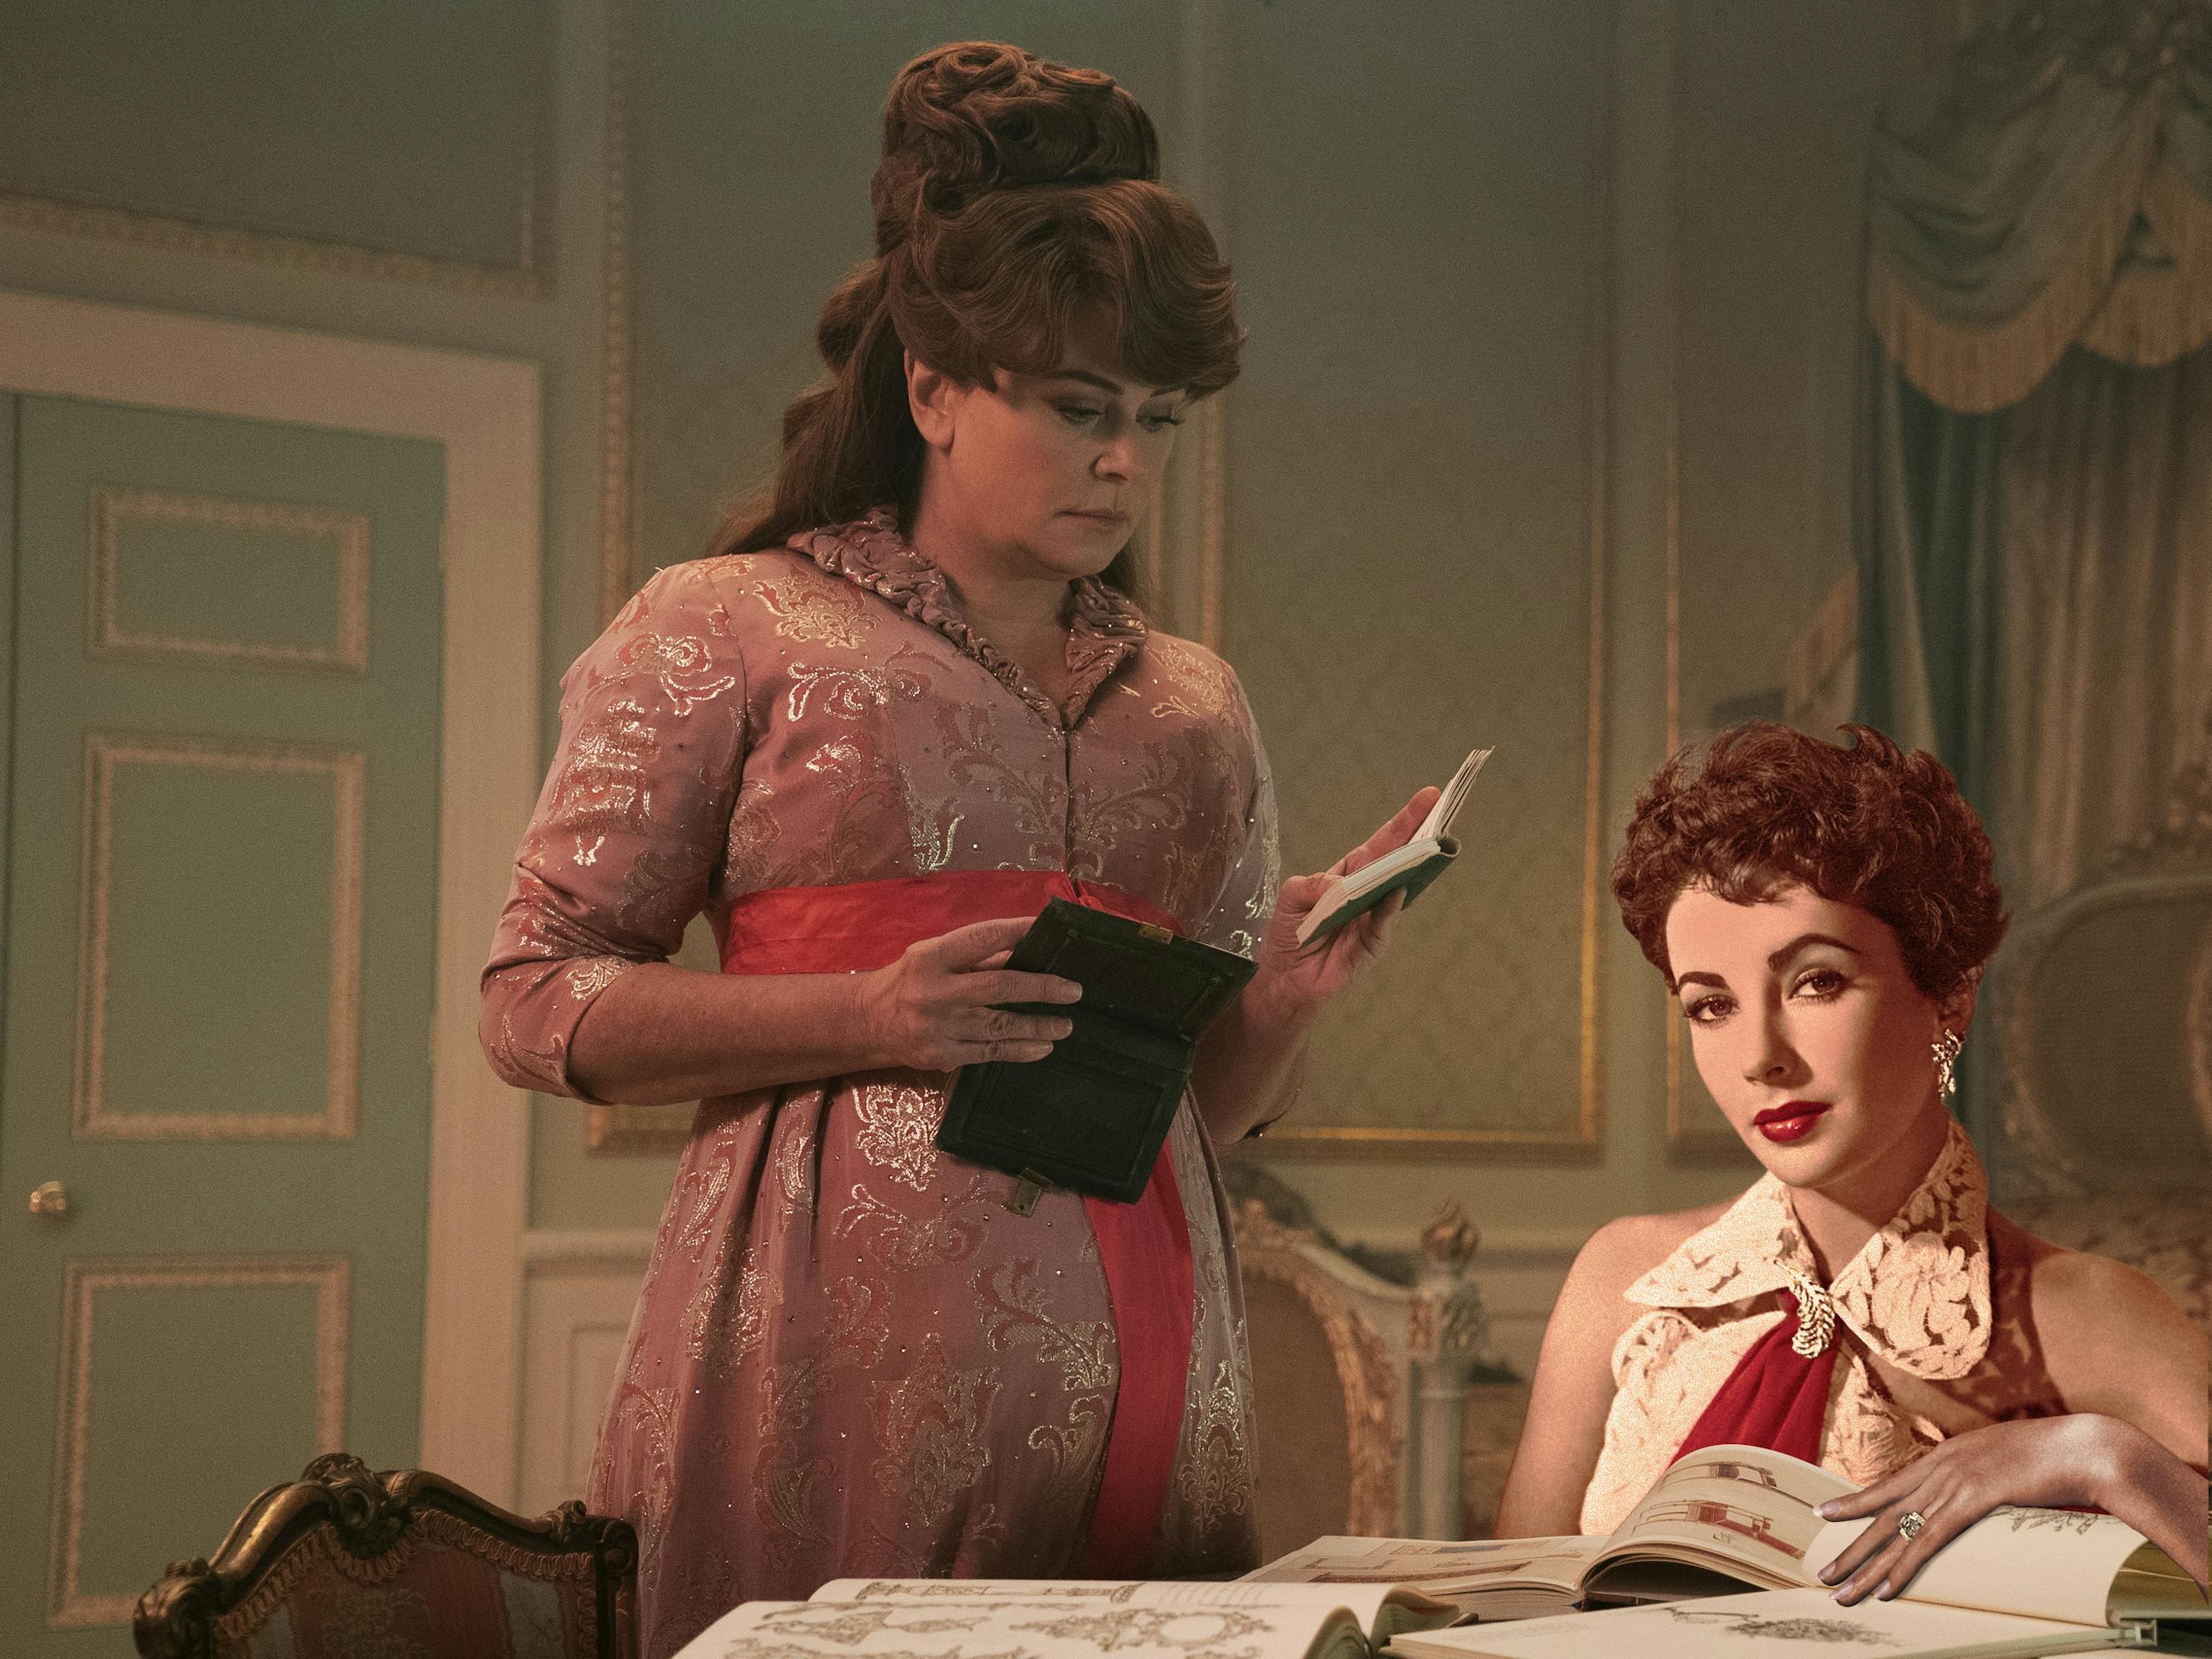 Lady Featherington (Polly Walker) and Elizabeth Taylor look at books in a pistachio colored room.